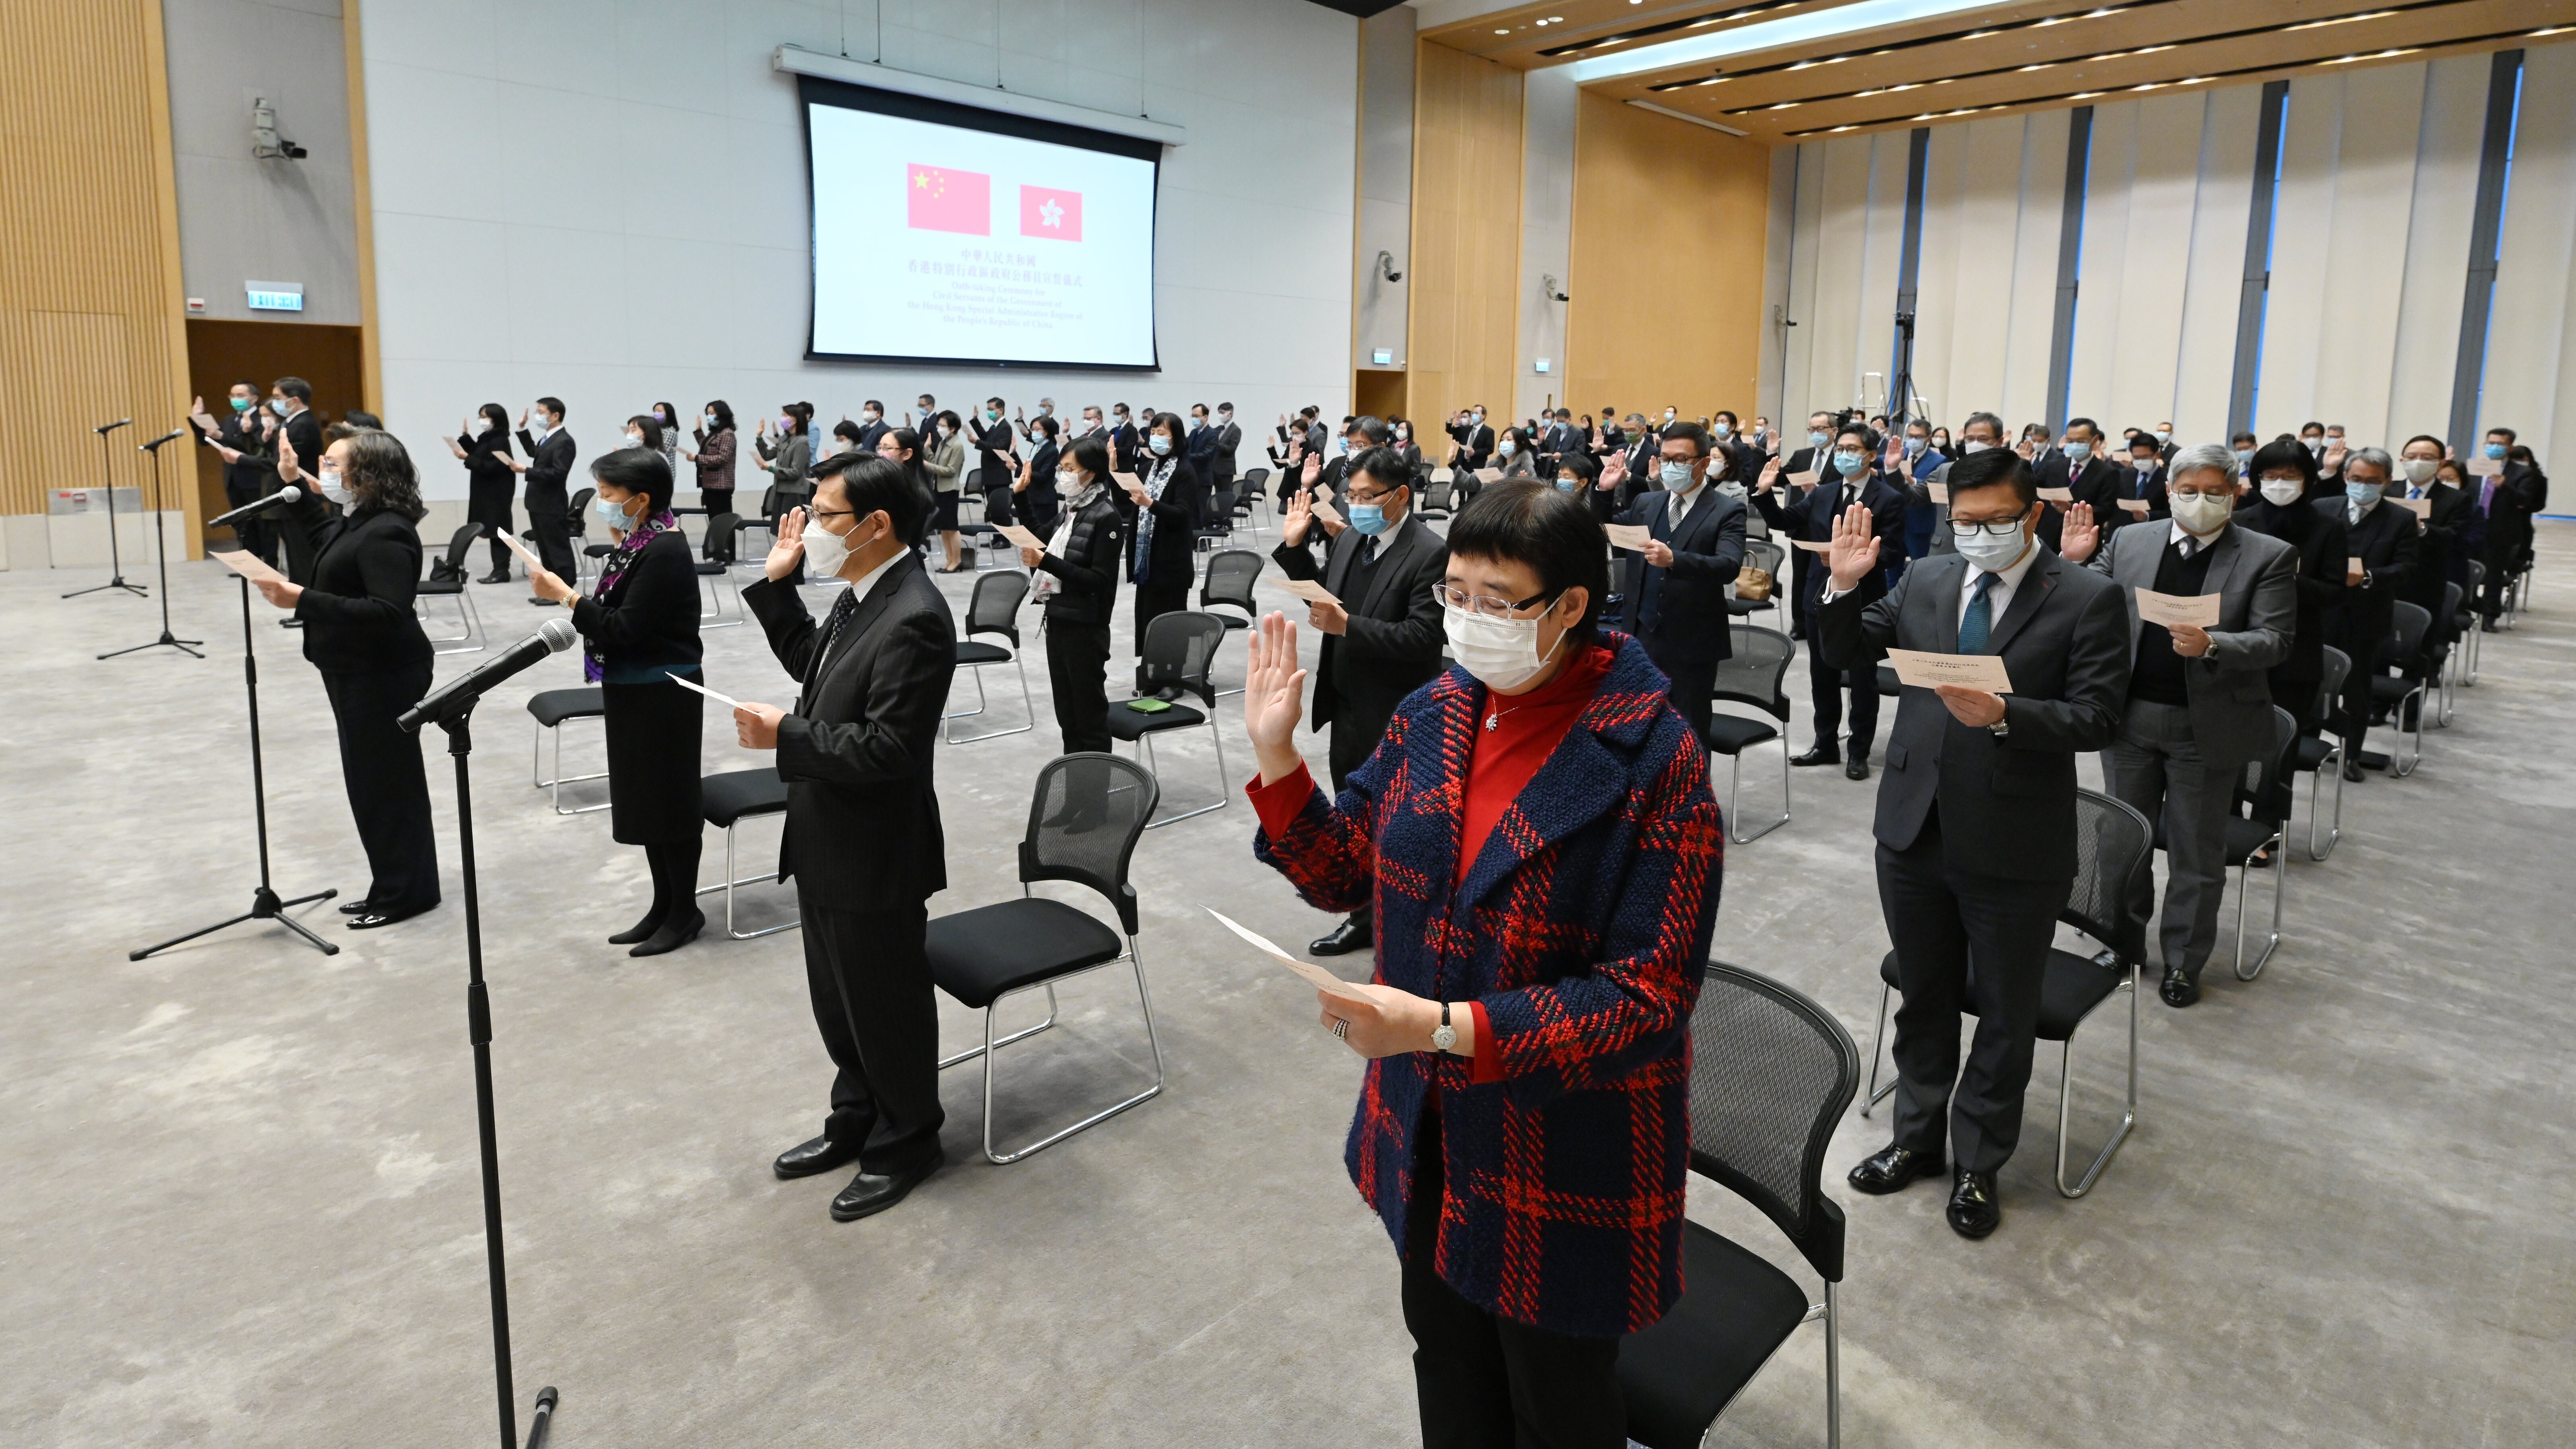 Hong Kong civil servants take their oath of allegiance to the Hong Kong SAR and the People’s Republic of China, on December 18. Photo: Handout